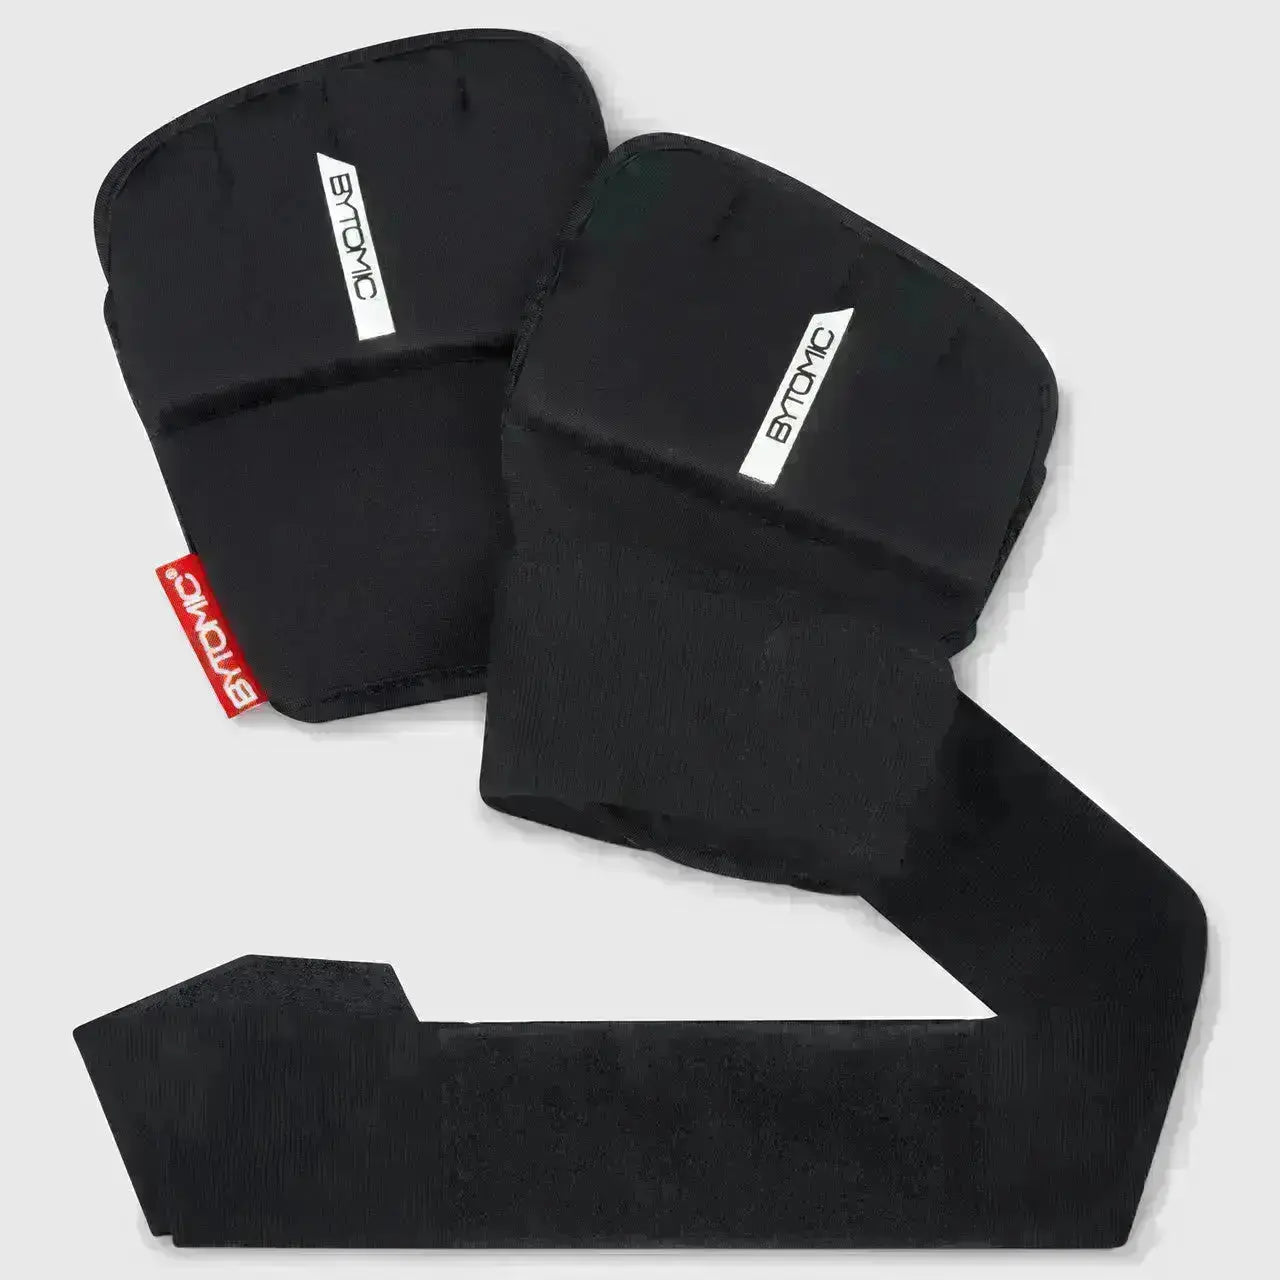 Bytomic Red Label Gel Hand Wrap - Black - Fight Co